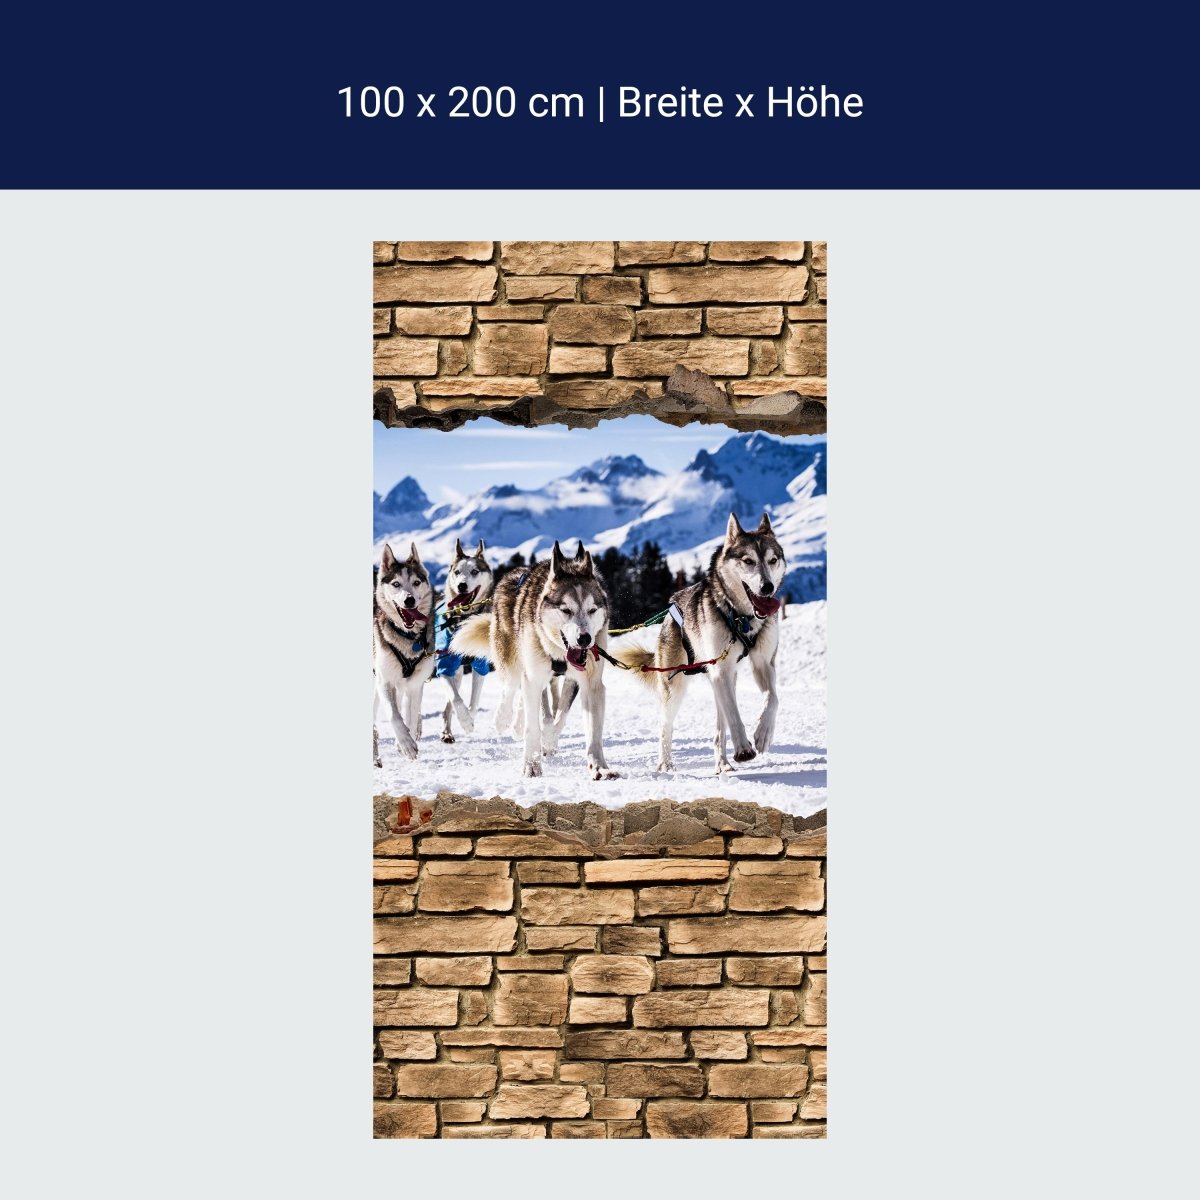 Shower Wall 3D Sled Dogs Racing - Stone Wall M0671